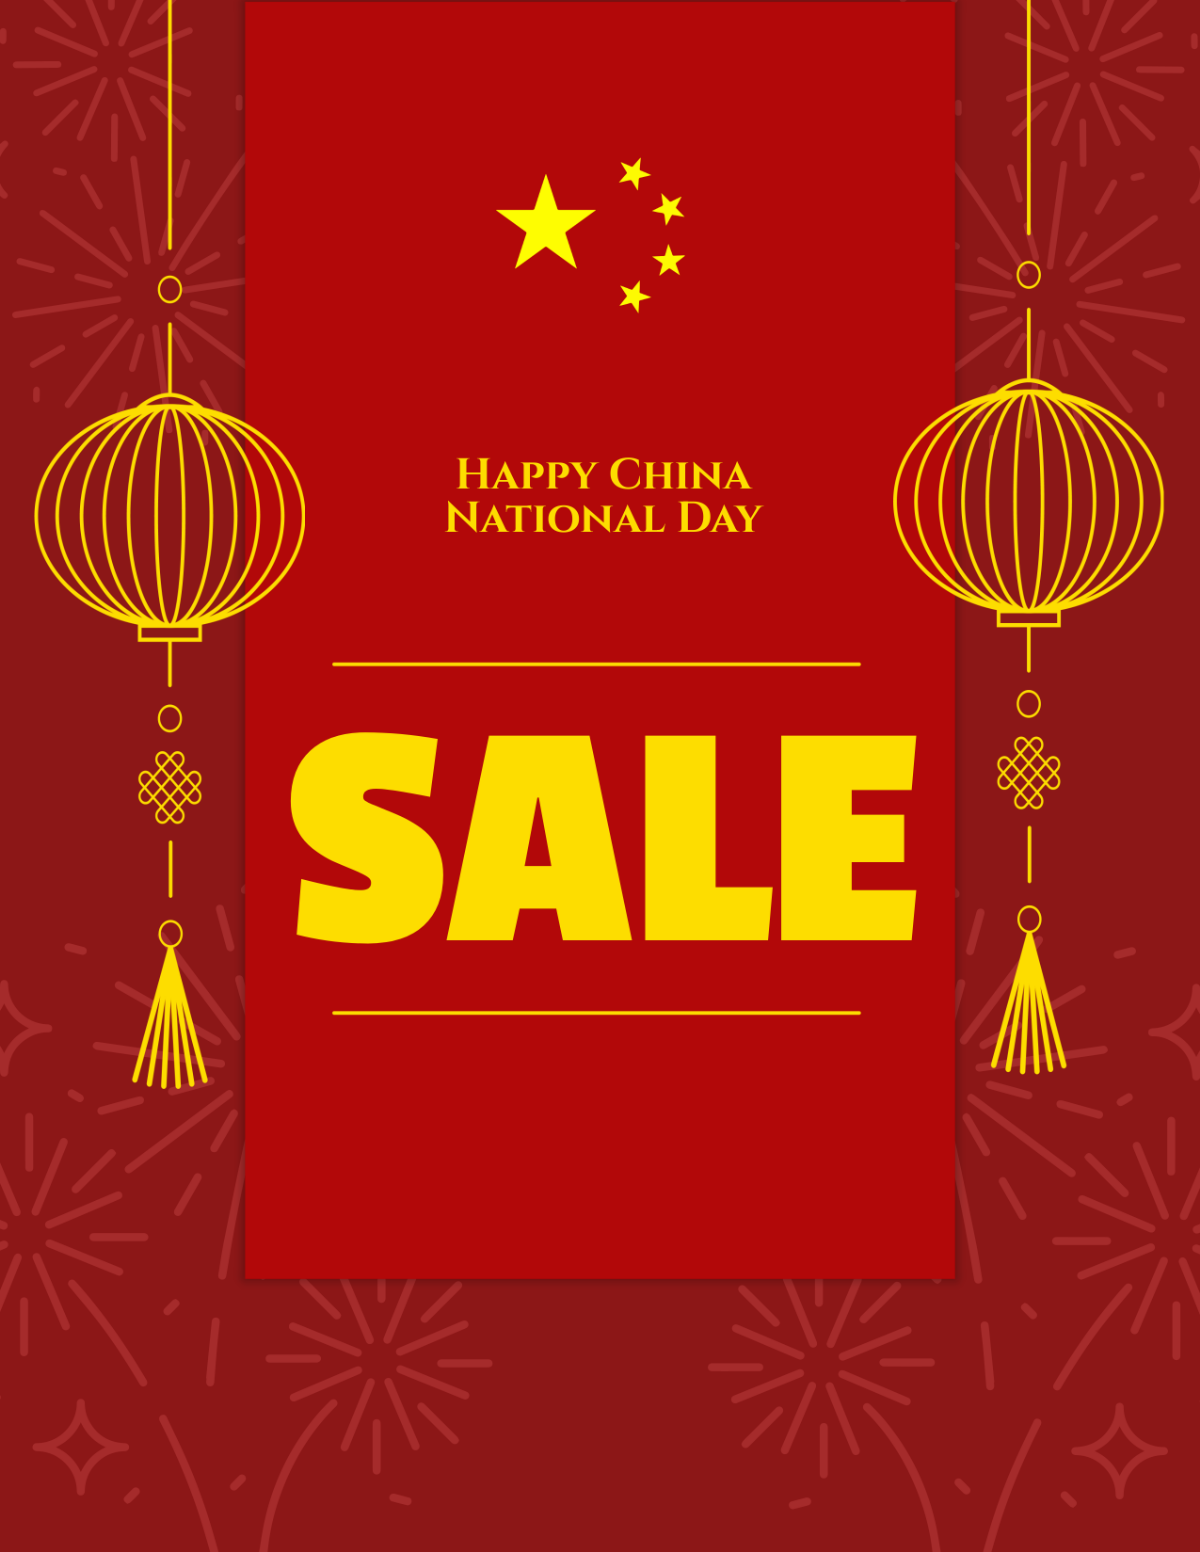 China National Day Sales Flyer